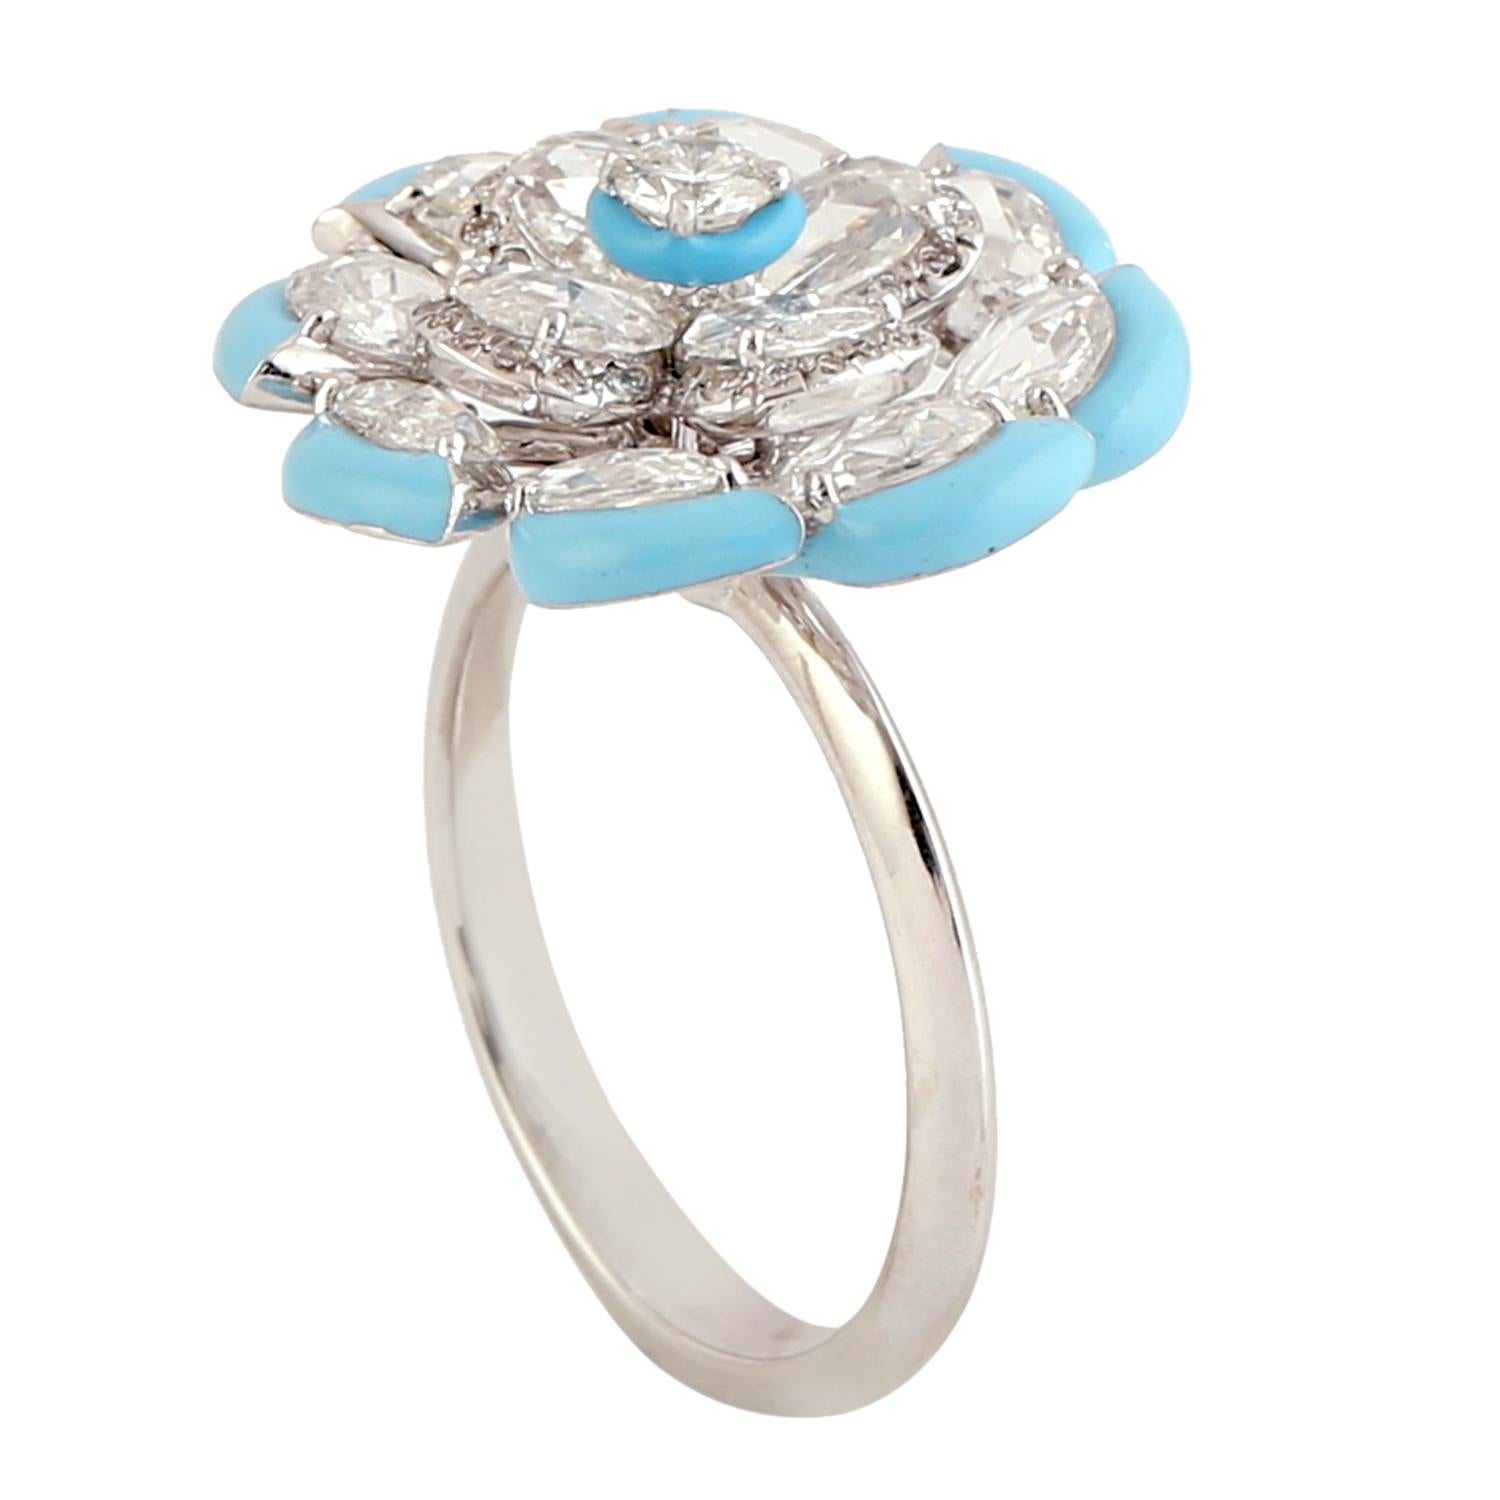 Turquoise Ceramic Borders Ring in White Gold with Rose Cut Diamond Flower Petals In New Condition For Sale In New York, NY